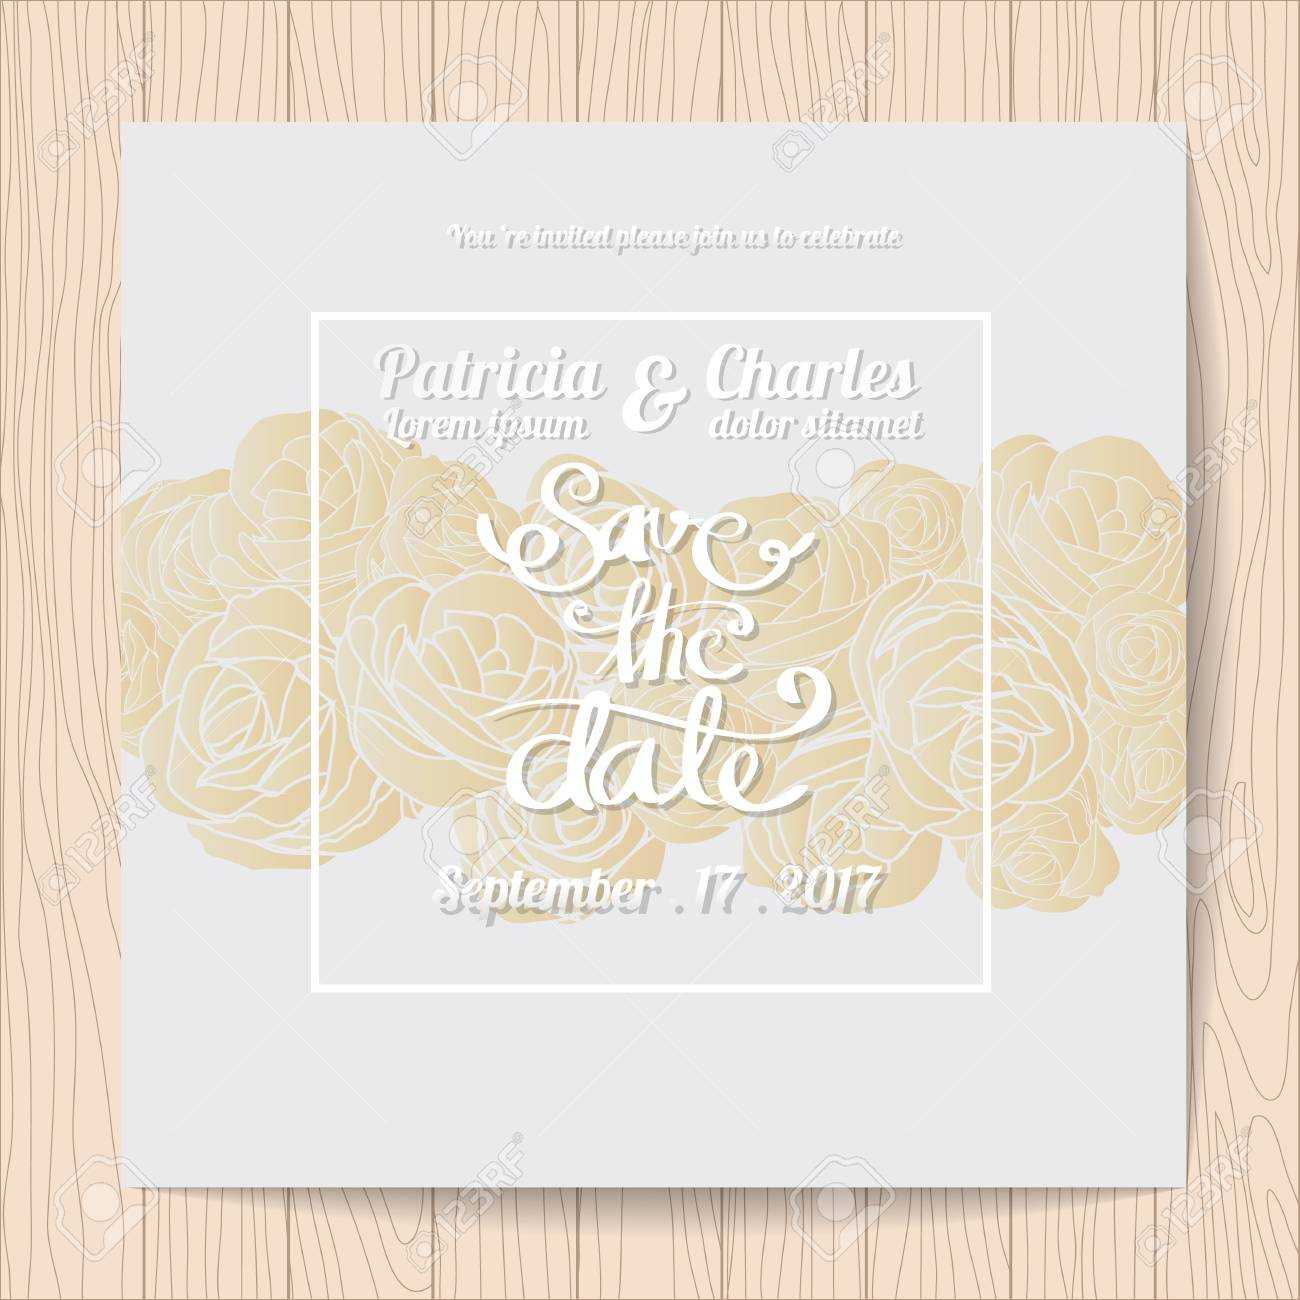 Wedding Invitation Card Templates With Celebrate It Templates Place Cards